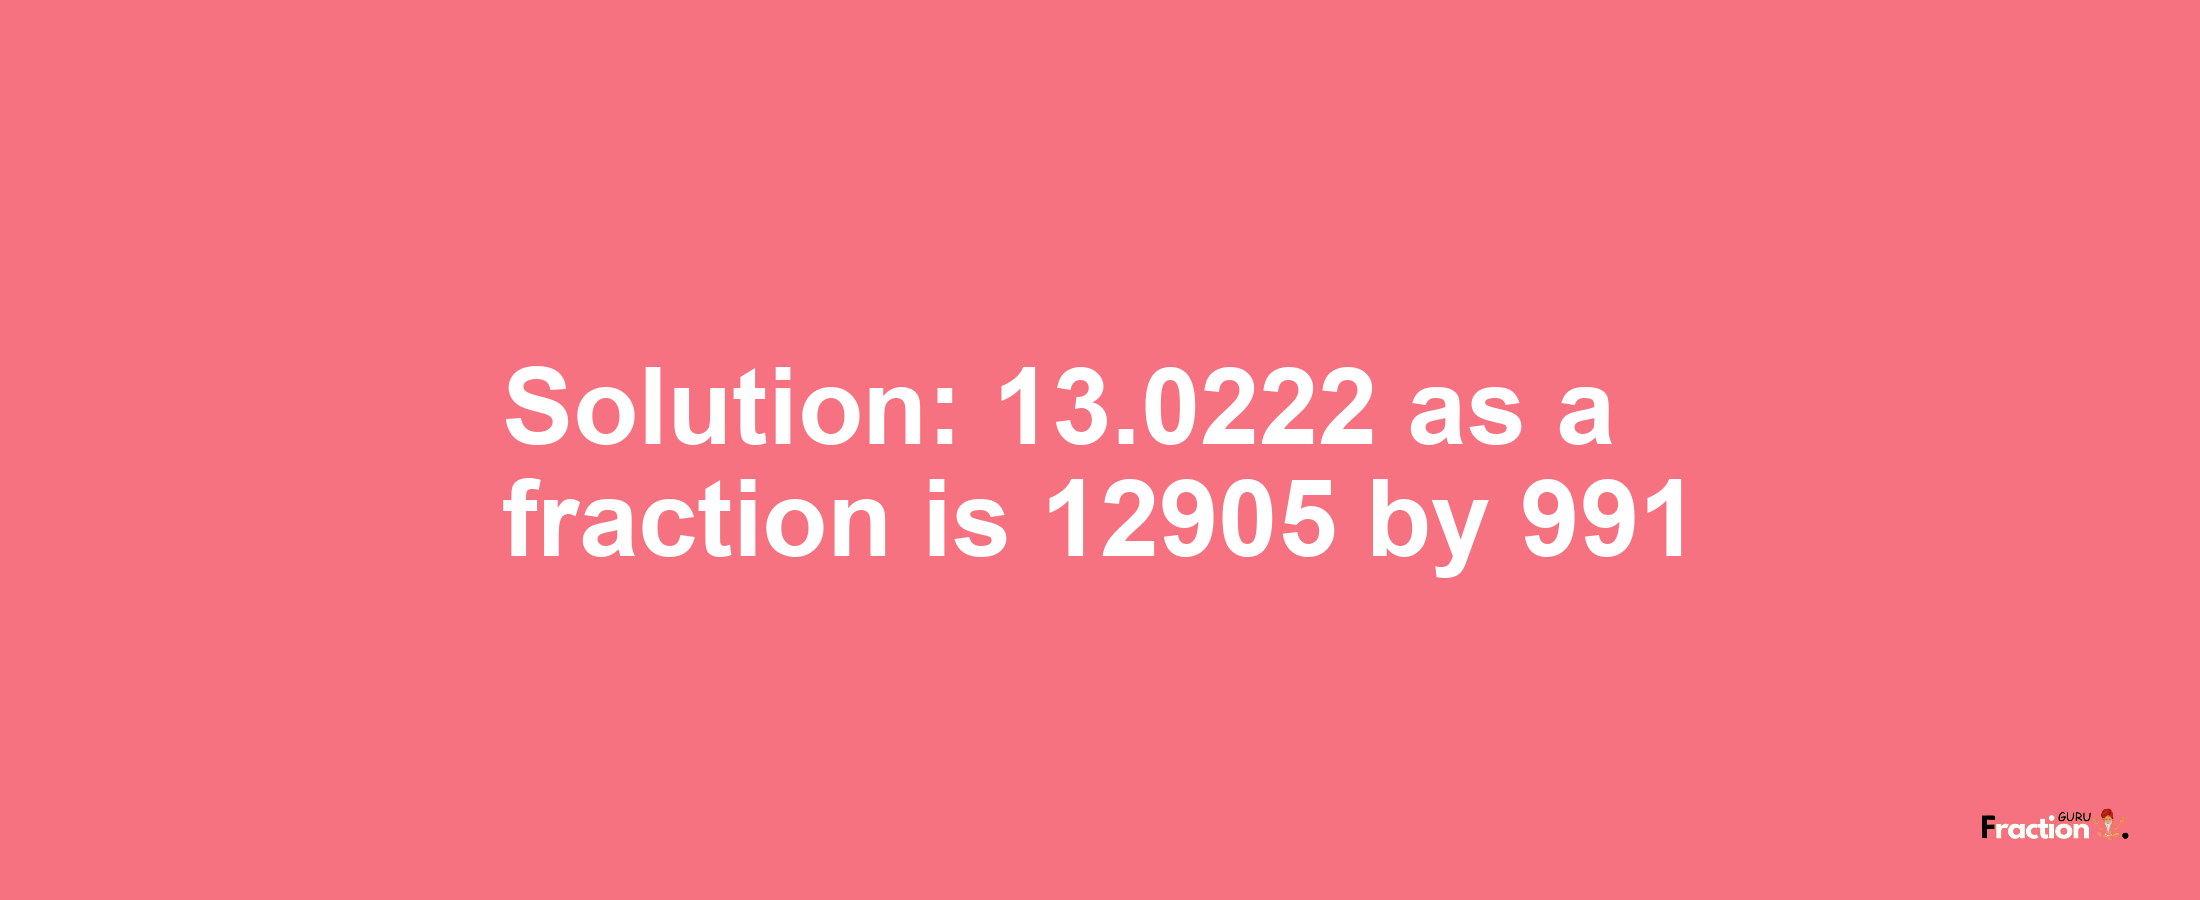 Solution:13.0222 as a fraction is 12905/991